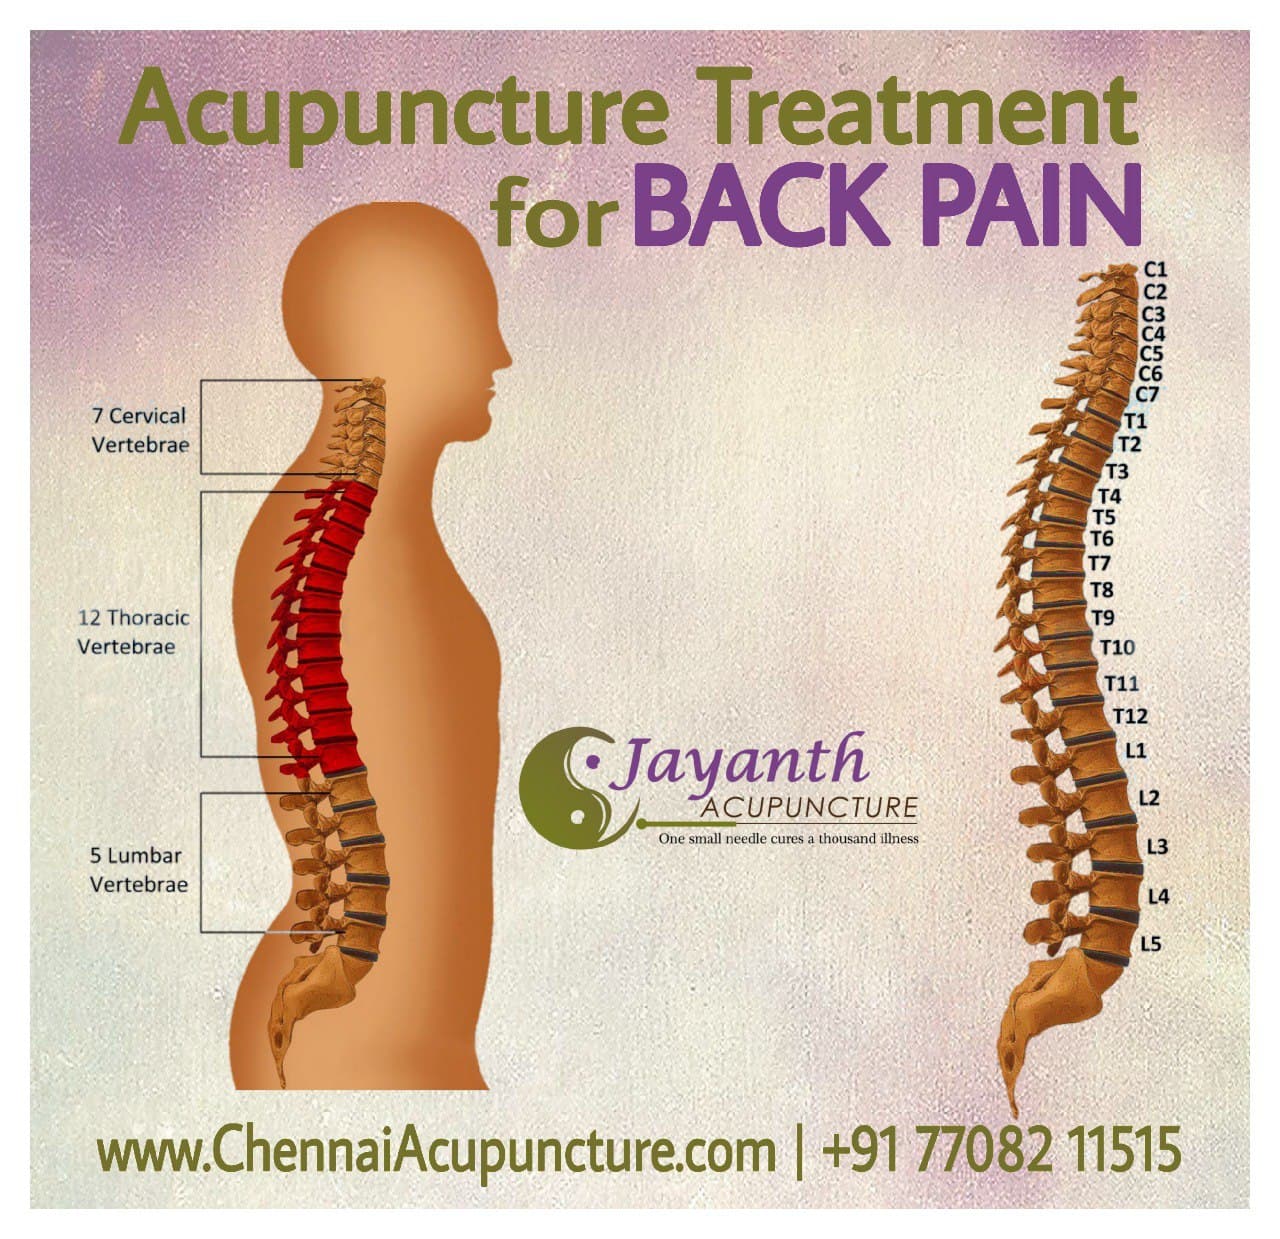 Acupuncture treatment for back pain in Chennai by expereinced ...